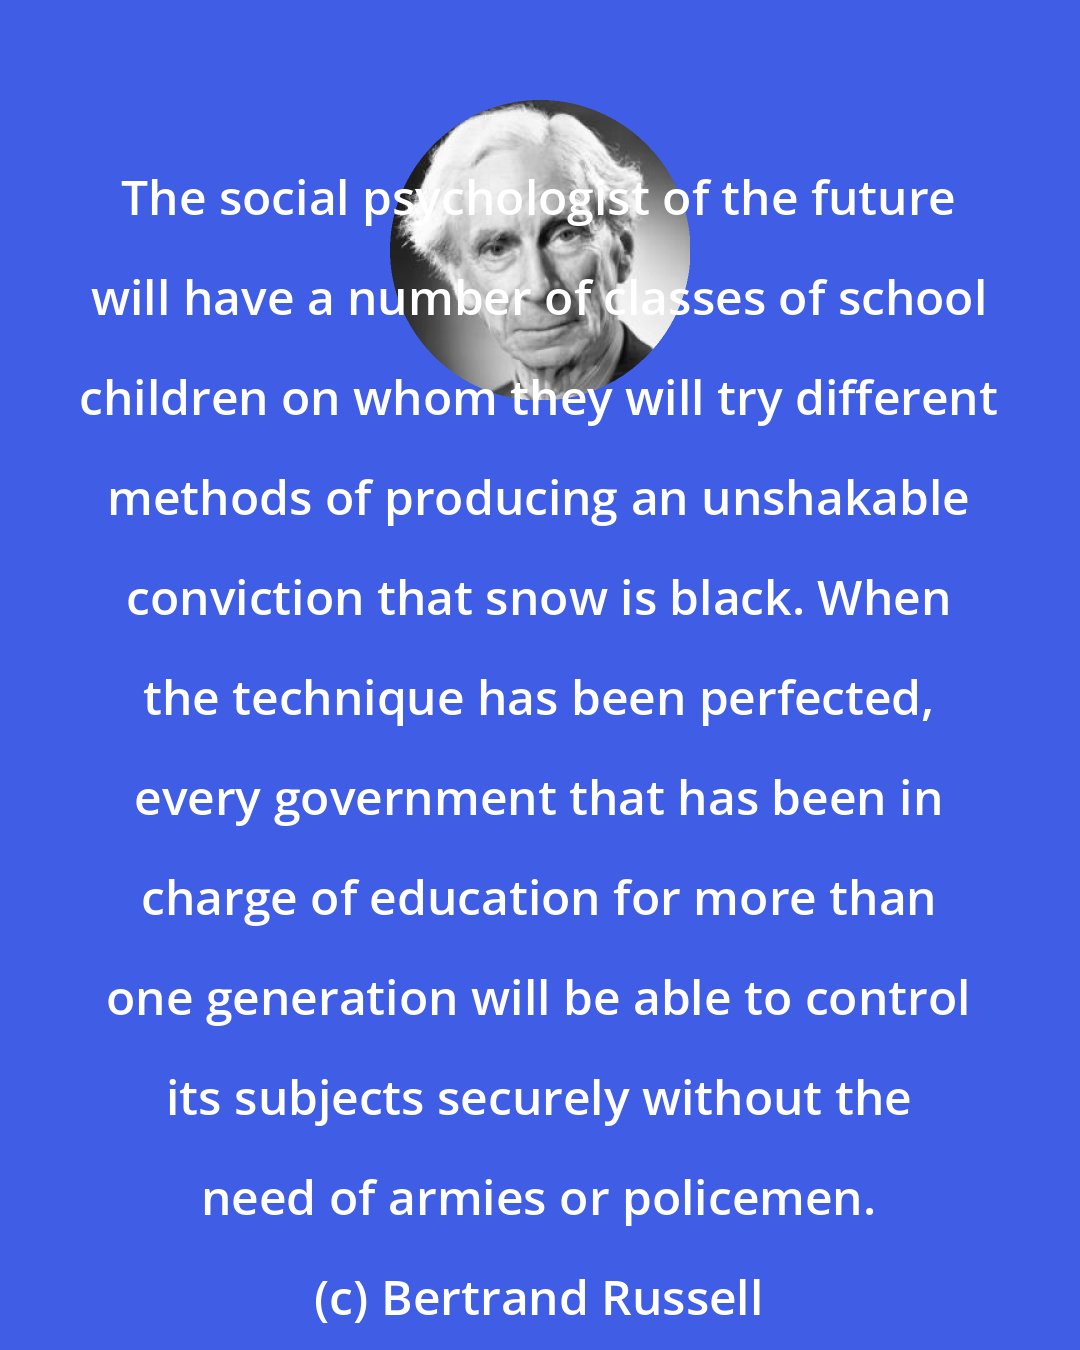 Bertrand Russell: The social psychologist of the future will have a number of classes of school children on whom they will try different methods of producing an unshakable conviction that snow is black. When the technique has been perfected, every government that has been in charge of education for more than one generation will be able to control its subjects securely without the need of armies or policemen.